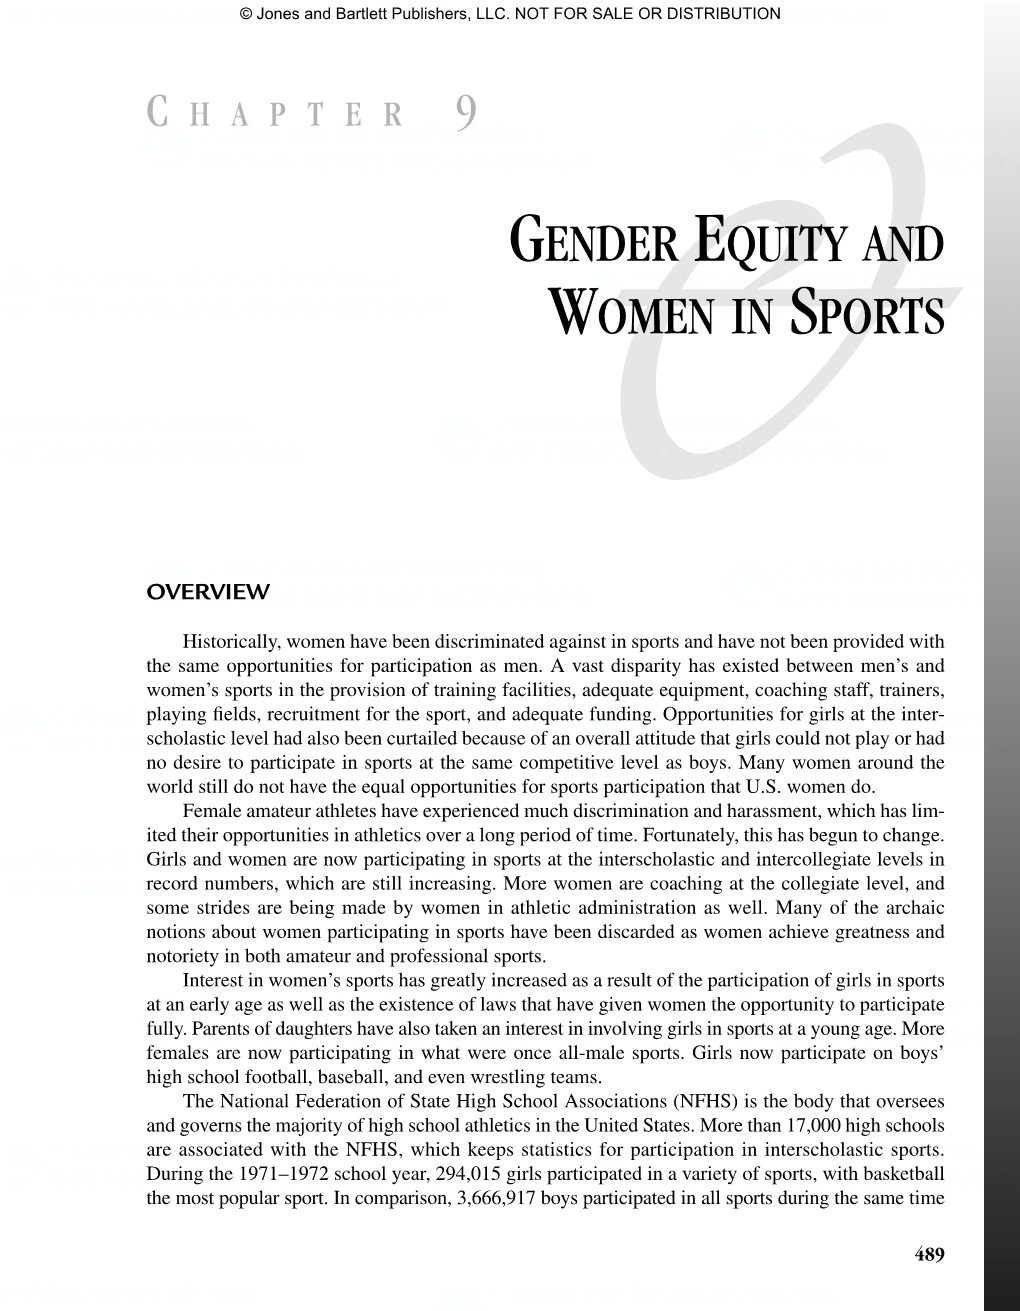 Gender Equity and Women in Sports